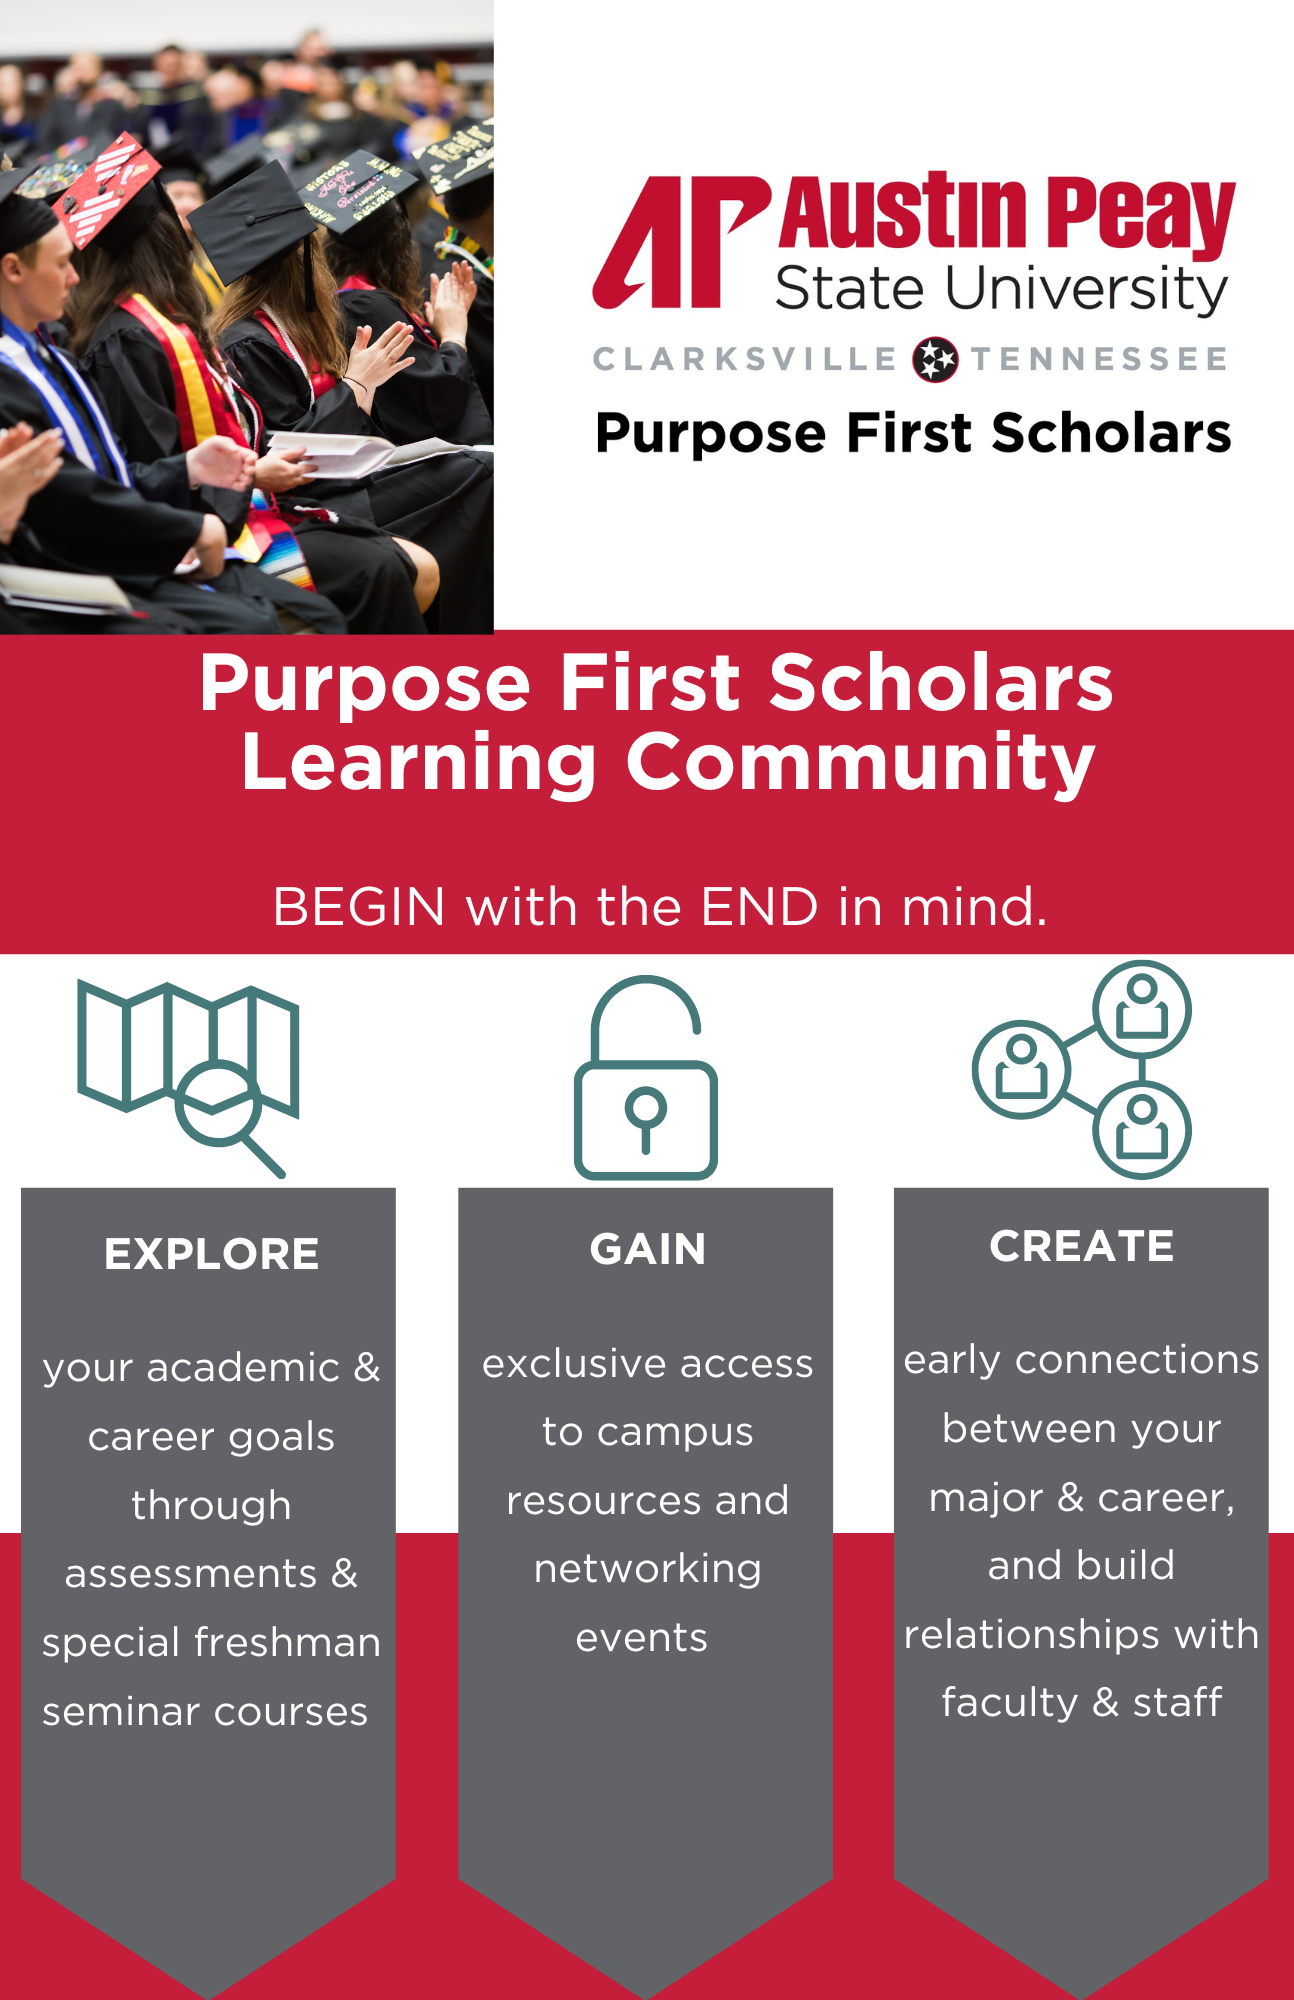 Summary poster of Purpose First Scholars